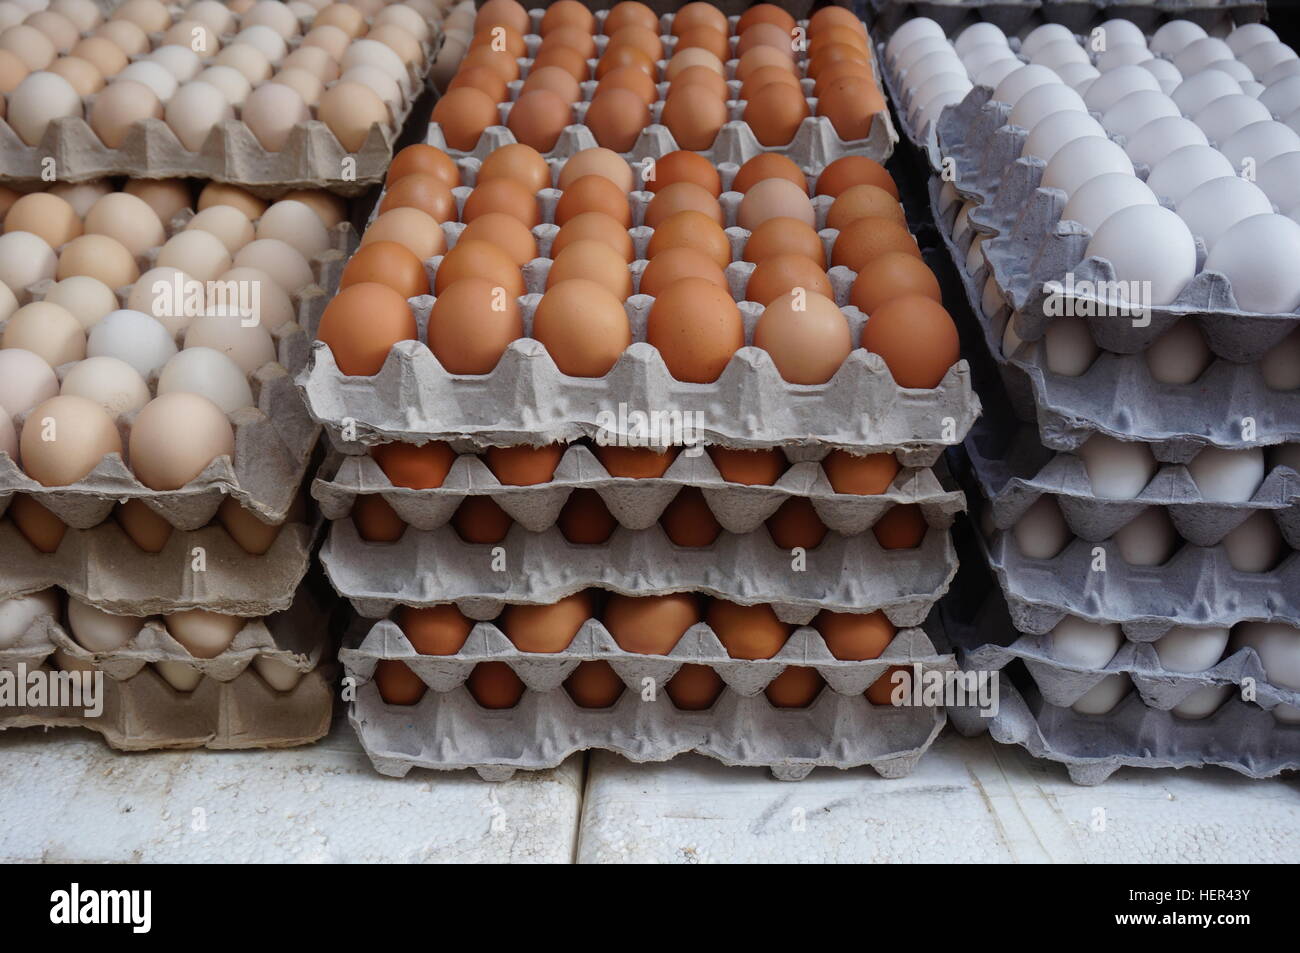 Giant cardboard crates of fresh white, yellow and brown eggs at the market Stock Photo